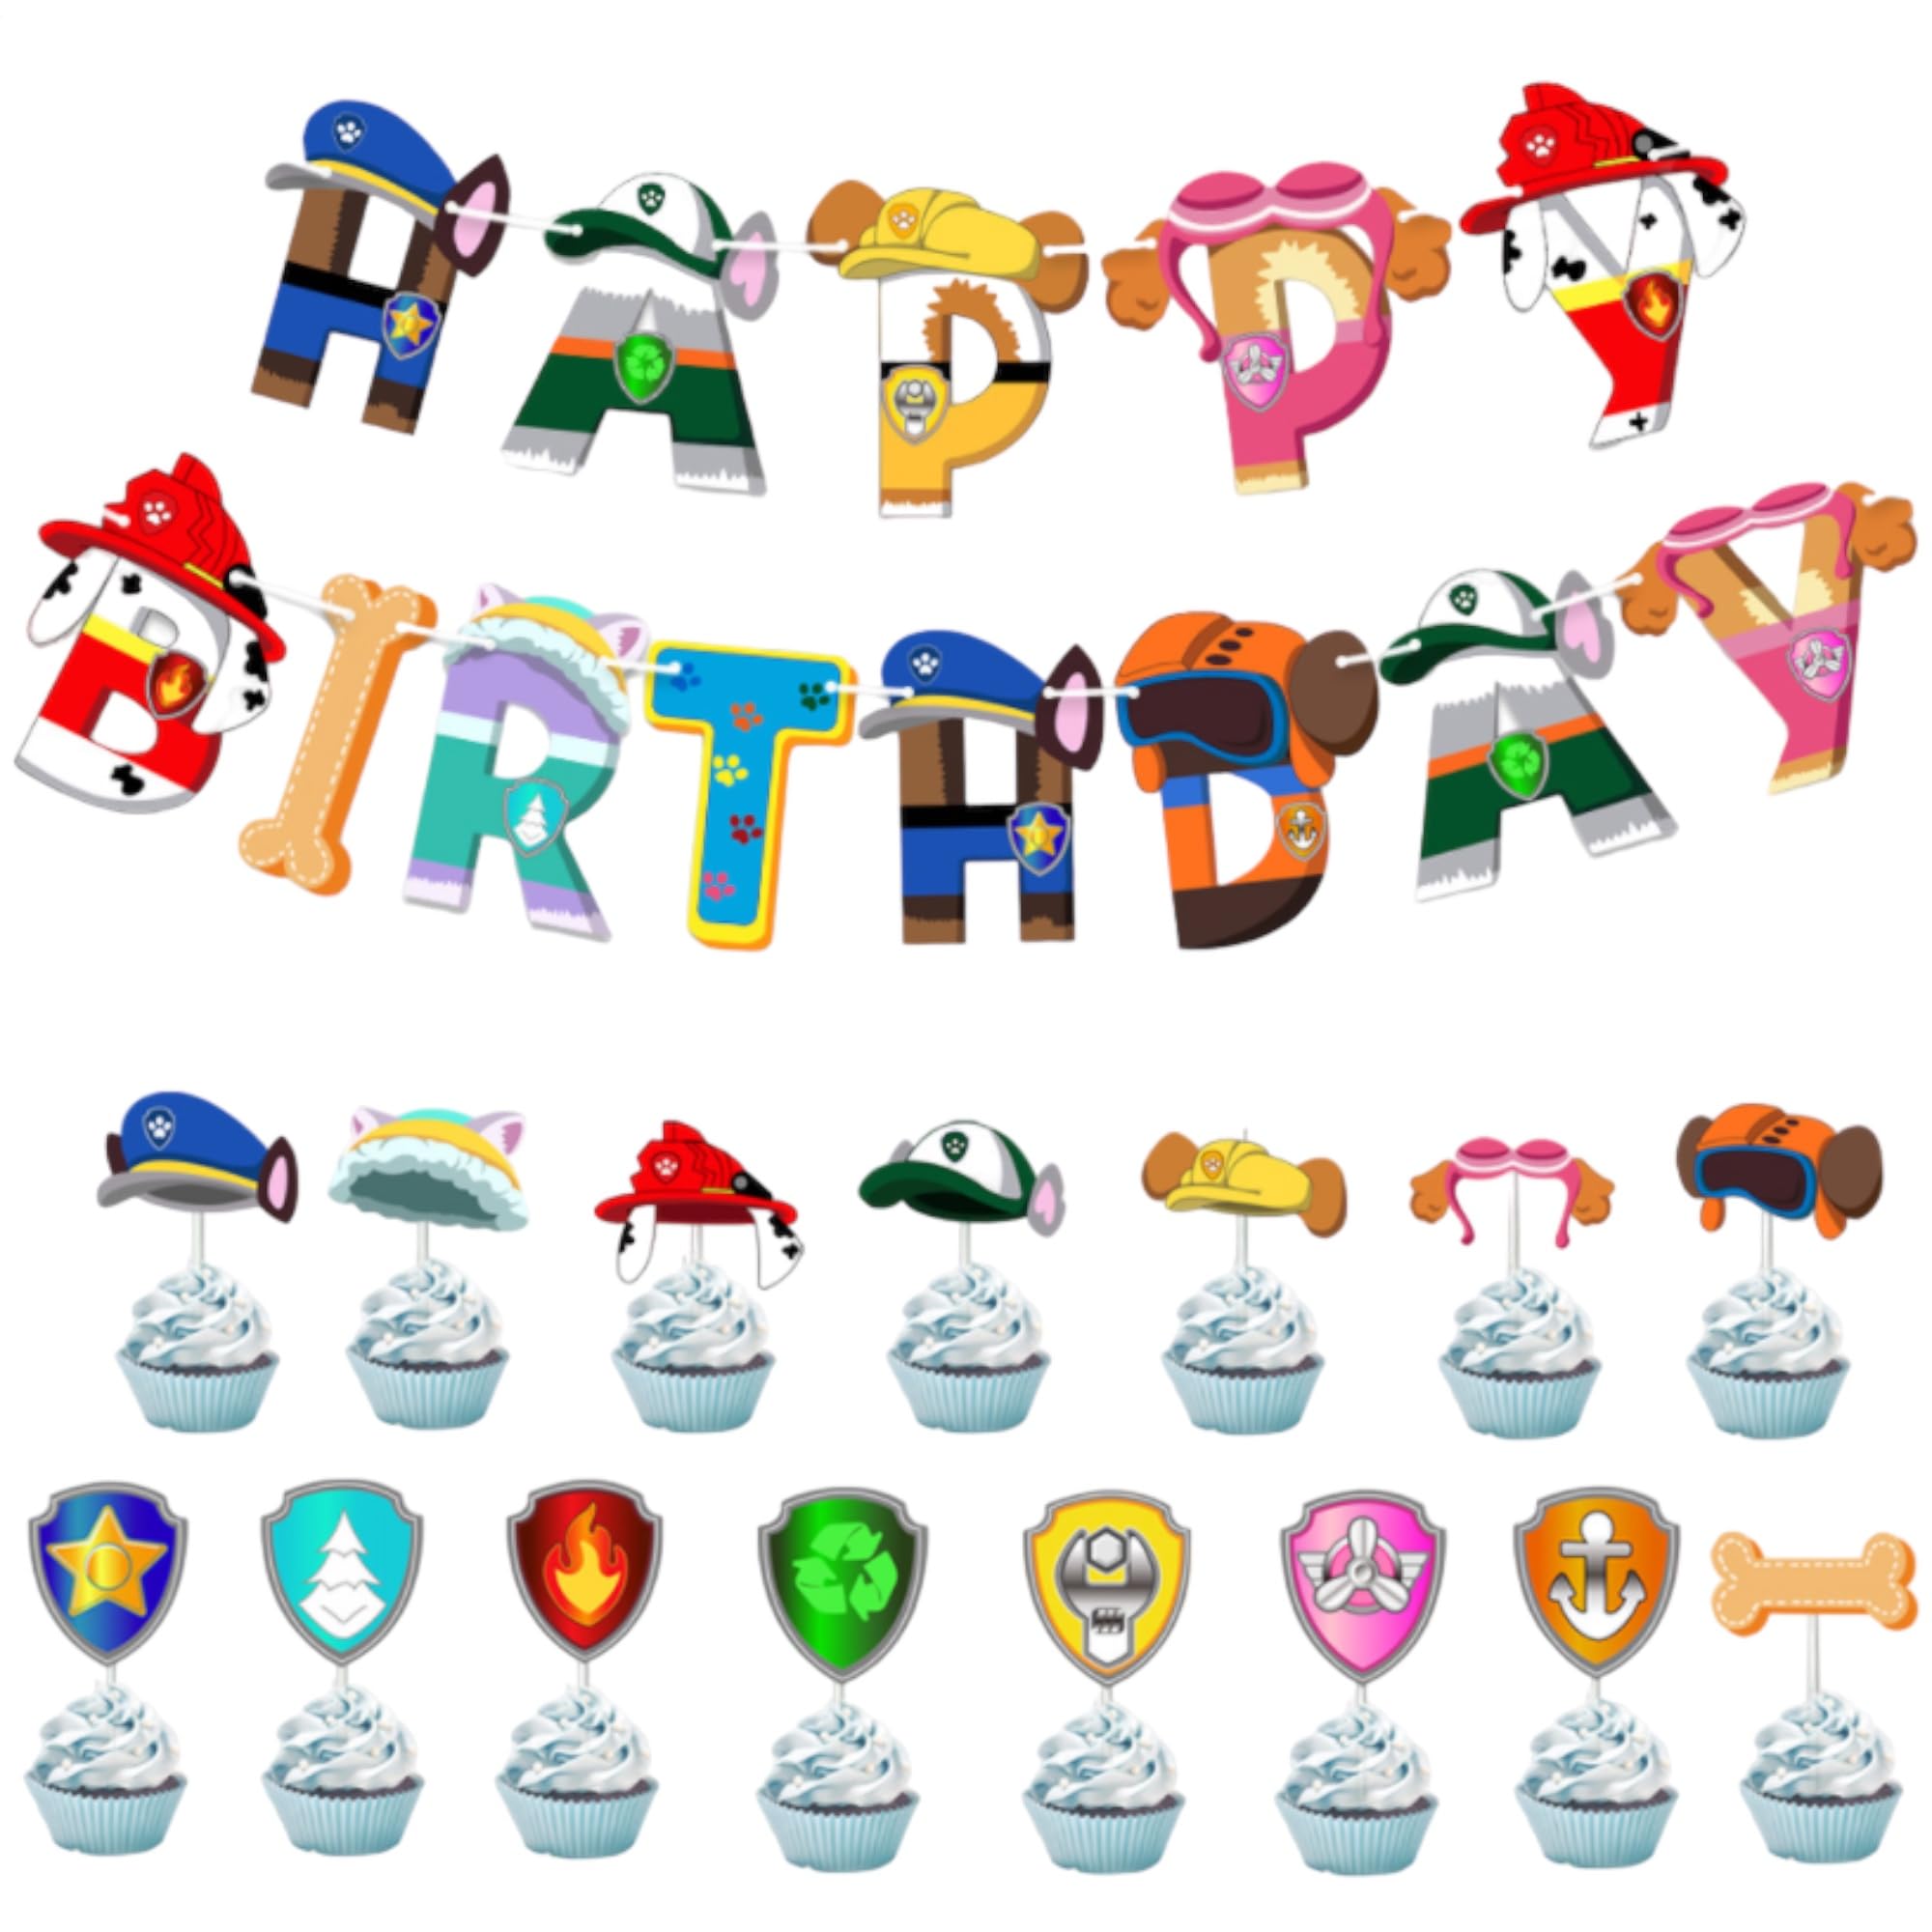 Paw Dog Patrol Birthday Decorations and Banner - Paw Dog Patrol Party Balloons - Character Cake Topper and Cupcake Picks - Kids Dog Theme Birthday Party by Jolly Jon